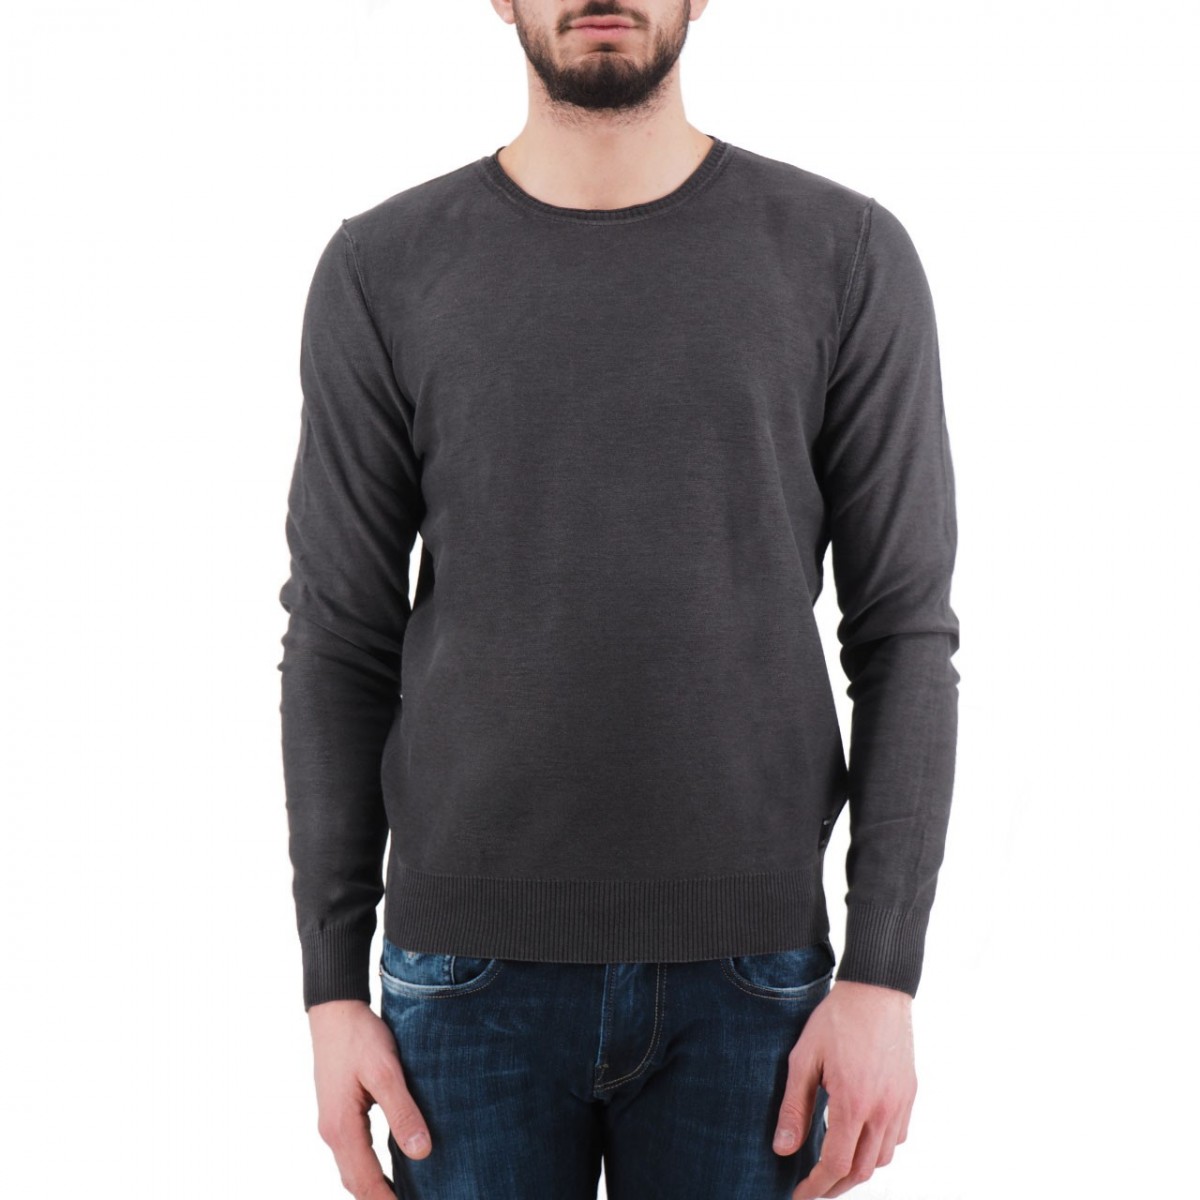 Replay | Crew Neck Sweater Faded Effect, Black | RPY_UK2656. 000 ...